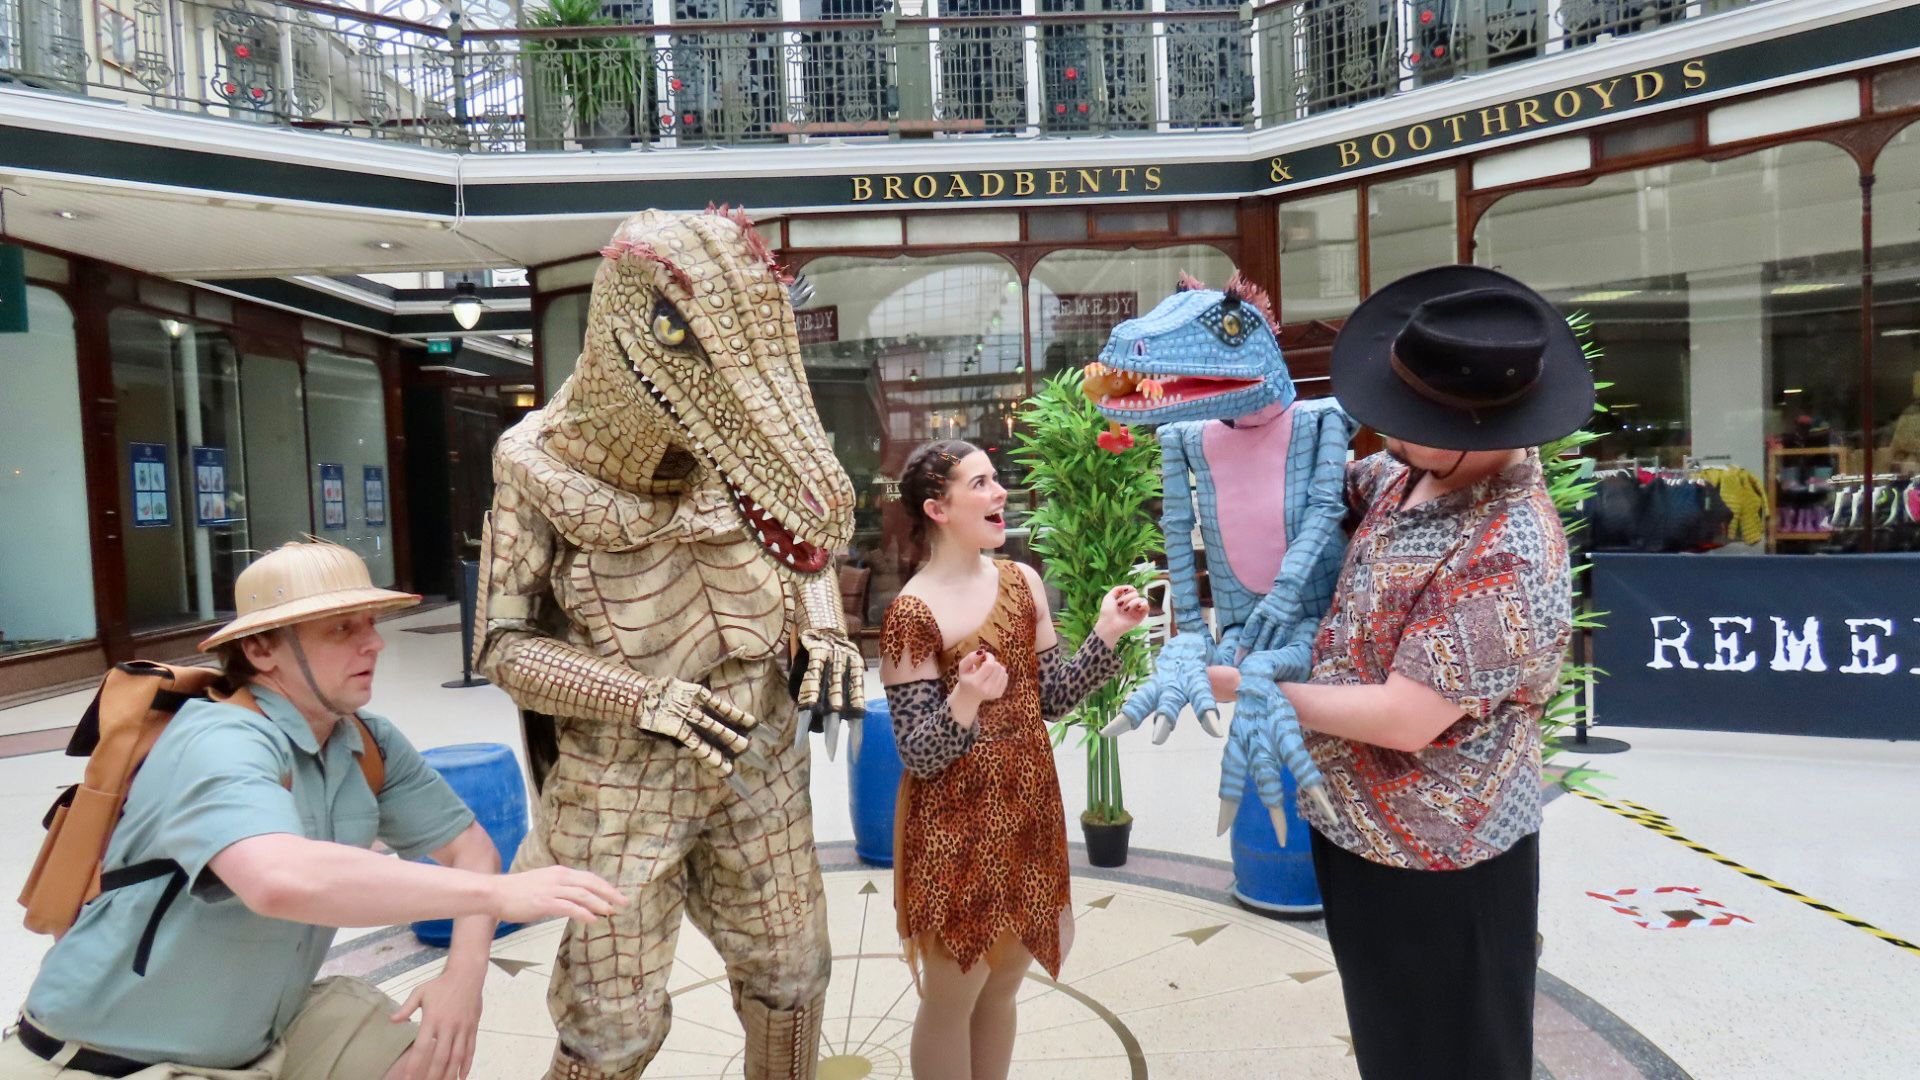 The dinosaurs are coming to Wayfarers Shopping Arcade in Southport this Easter, with a fun, free event for families from Gambolling Arena Theatre Company. Photo by Andrew Brown Stand up For Southport